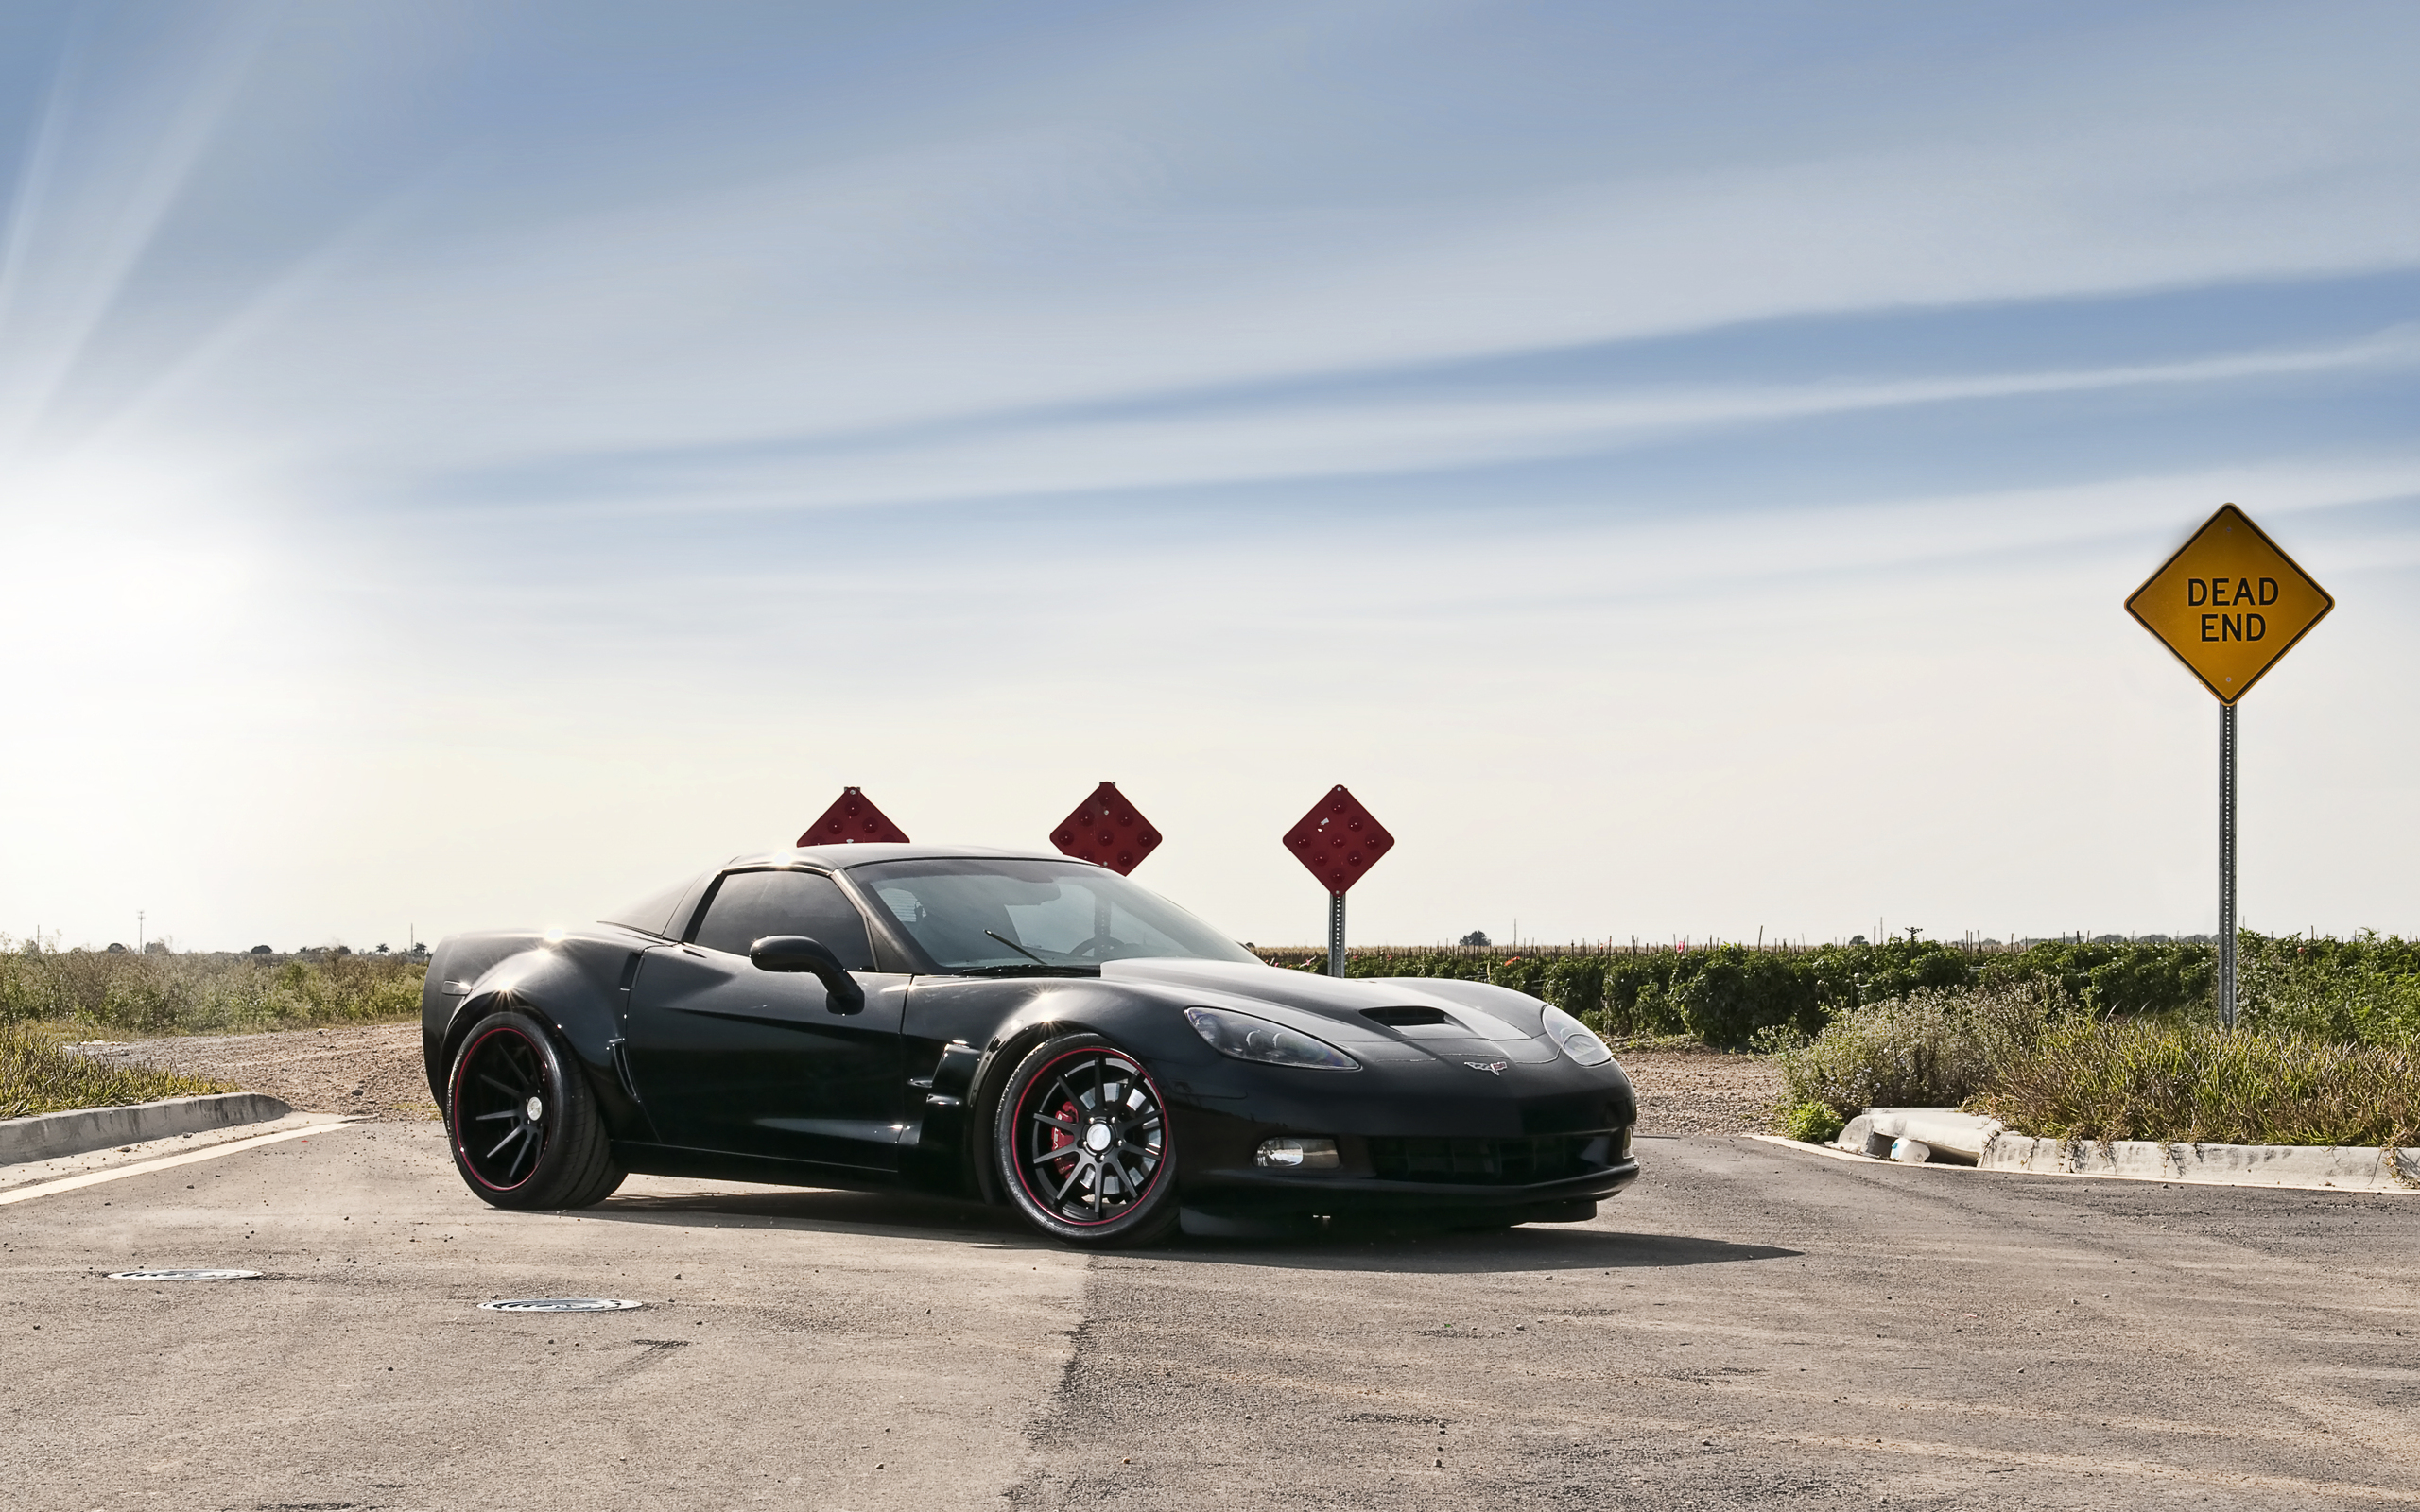 Corvette Full HD Wallpaper and Background Image | 2560x1600 | ID:205115